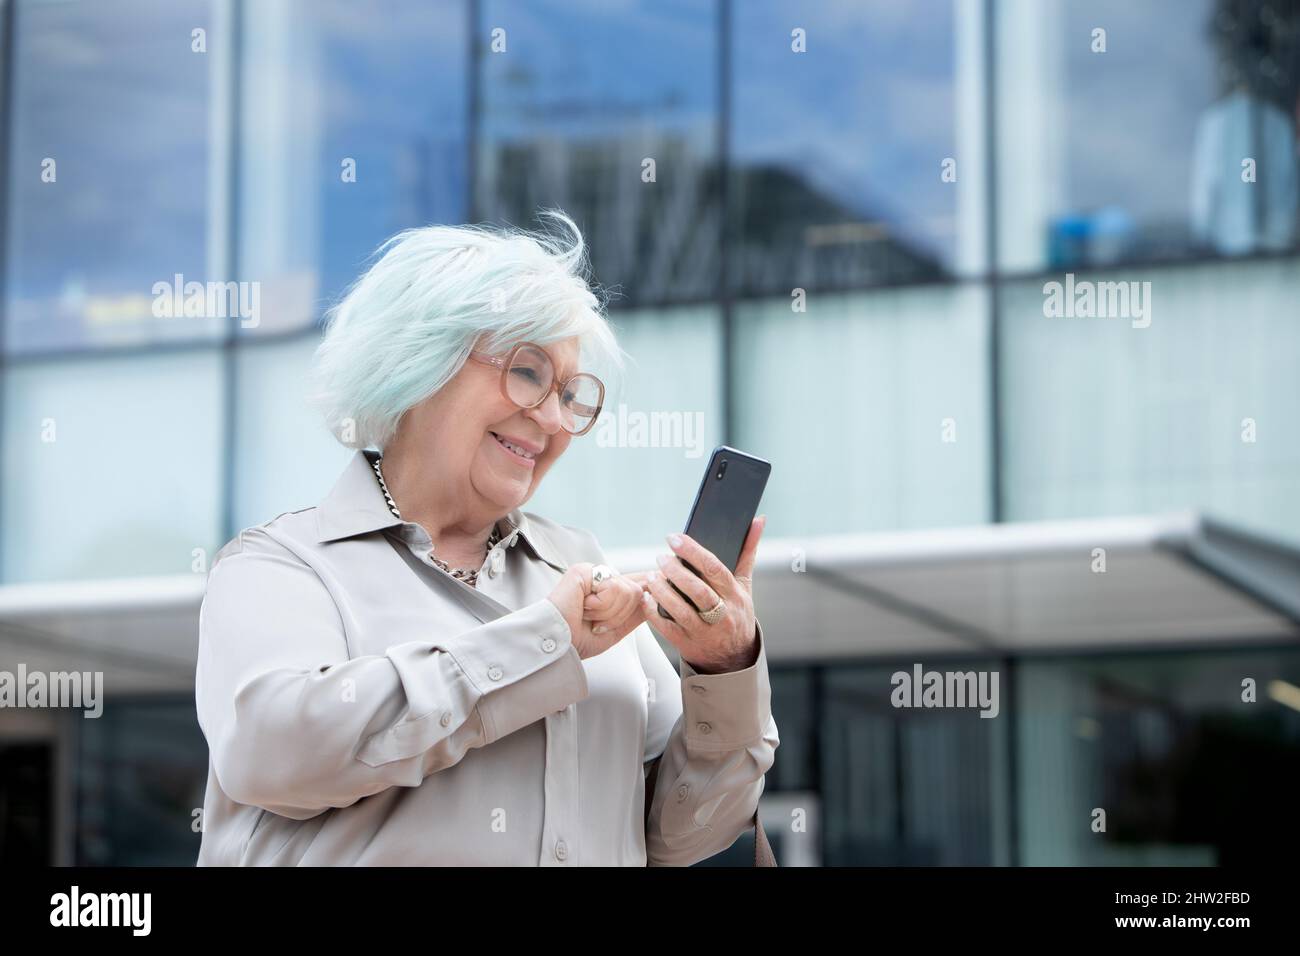 older business woman typing on her cell phone outdoors Stock Photo